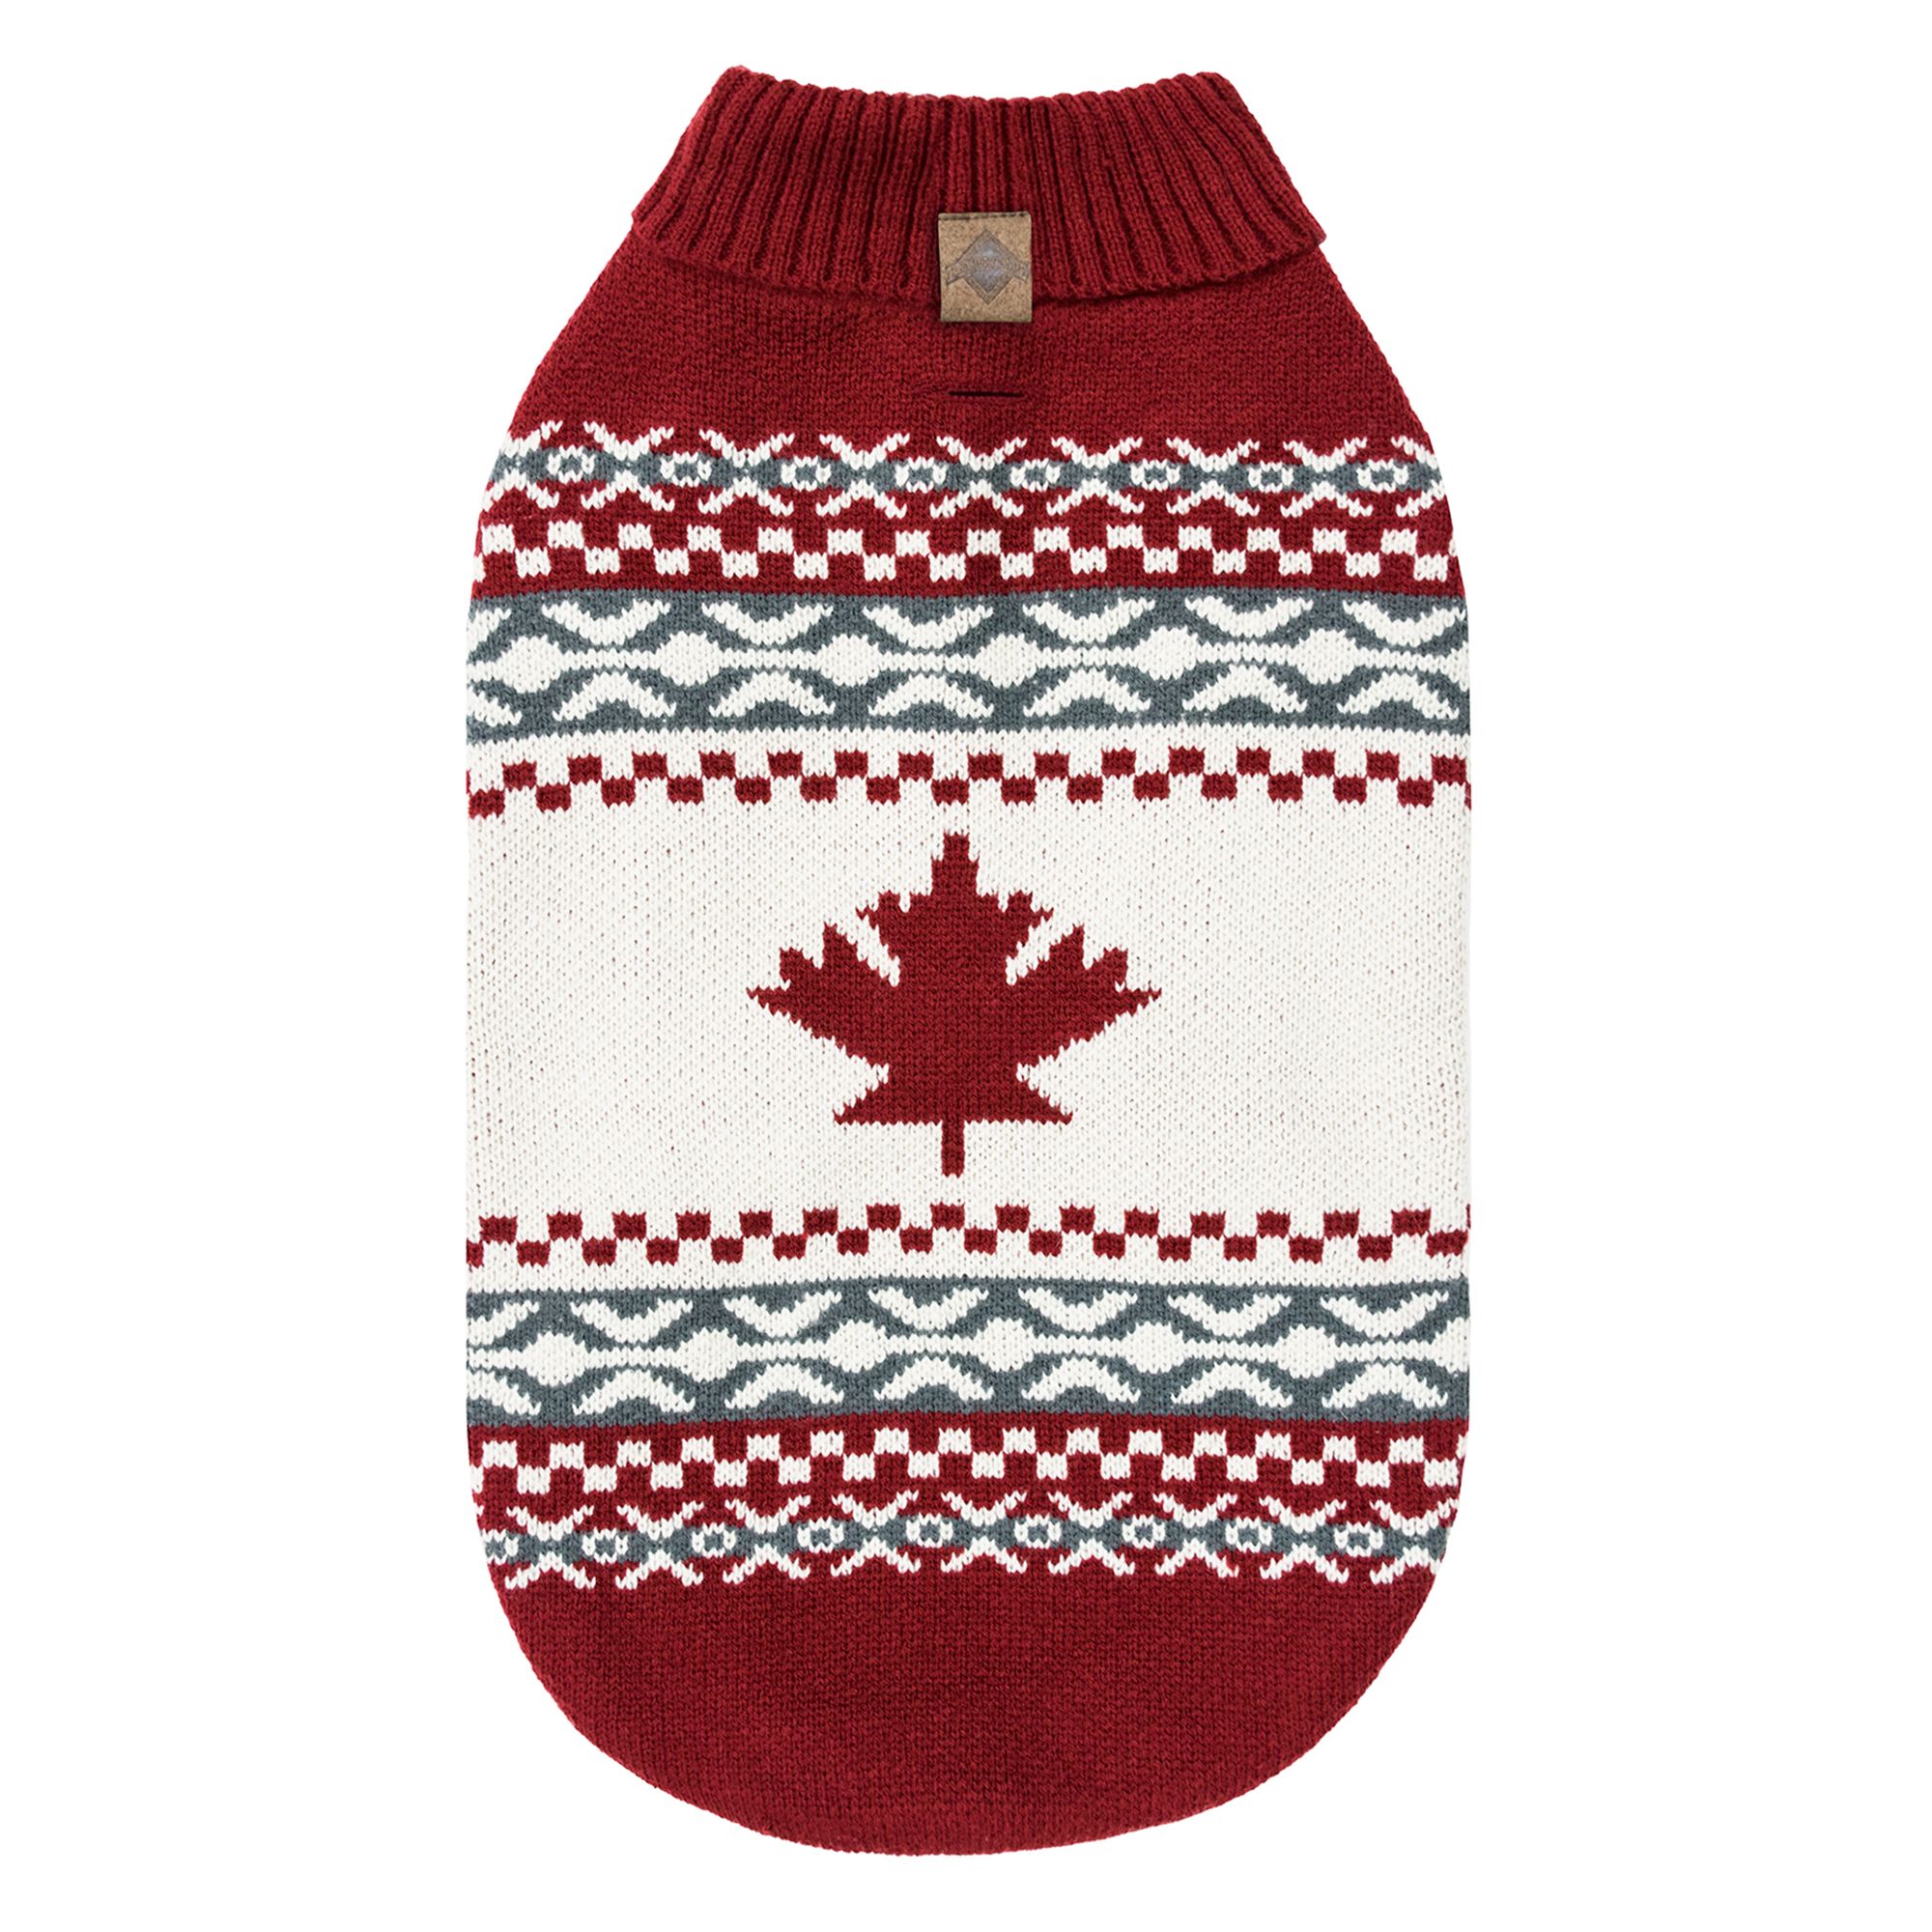 roots canada dog sweater